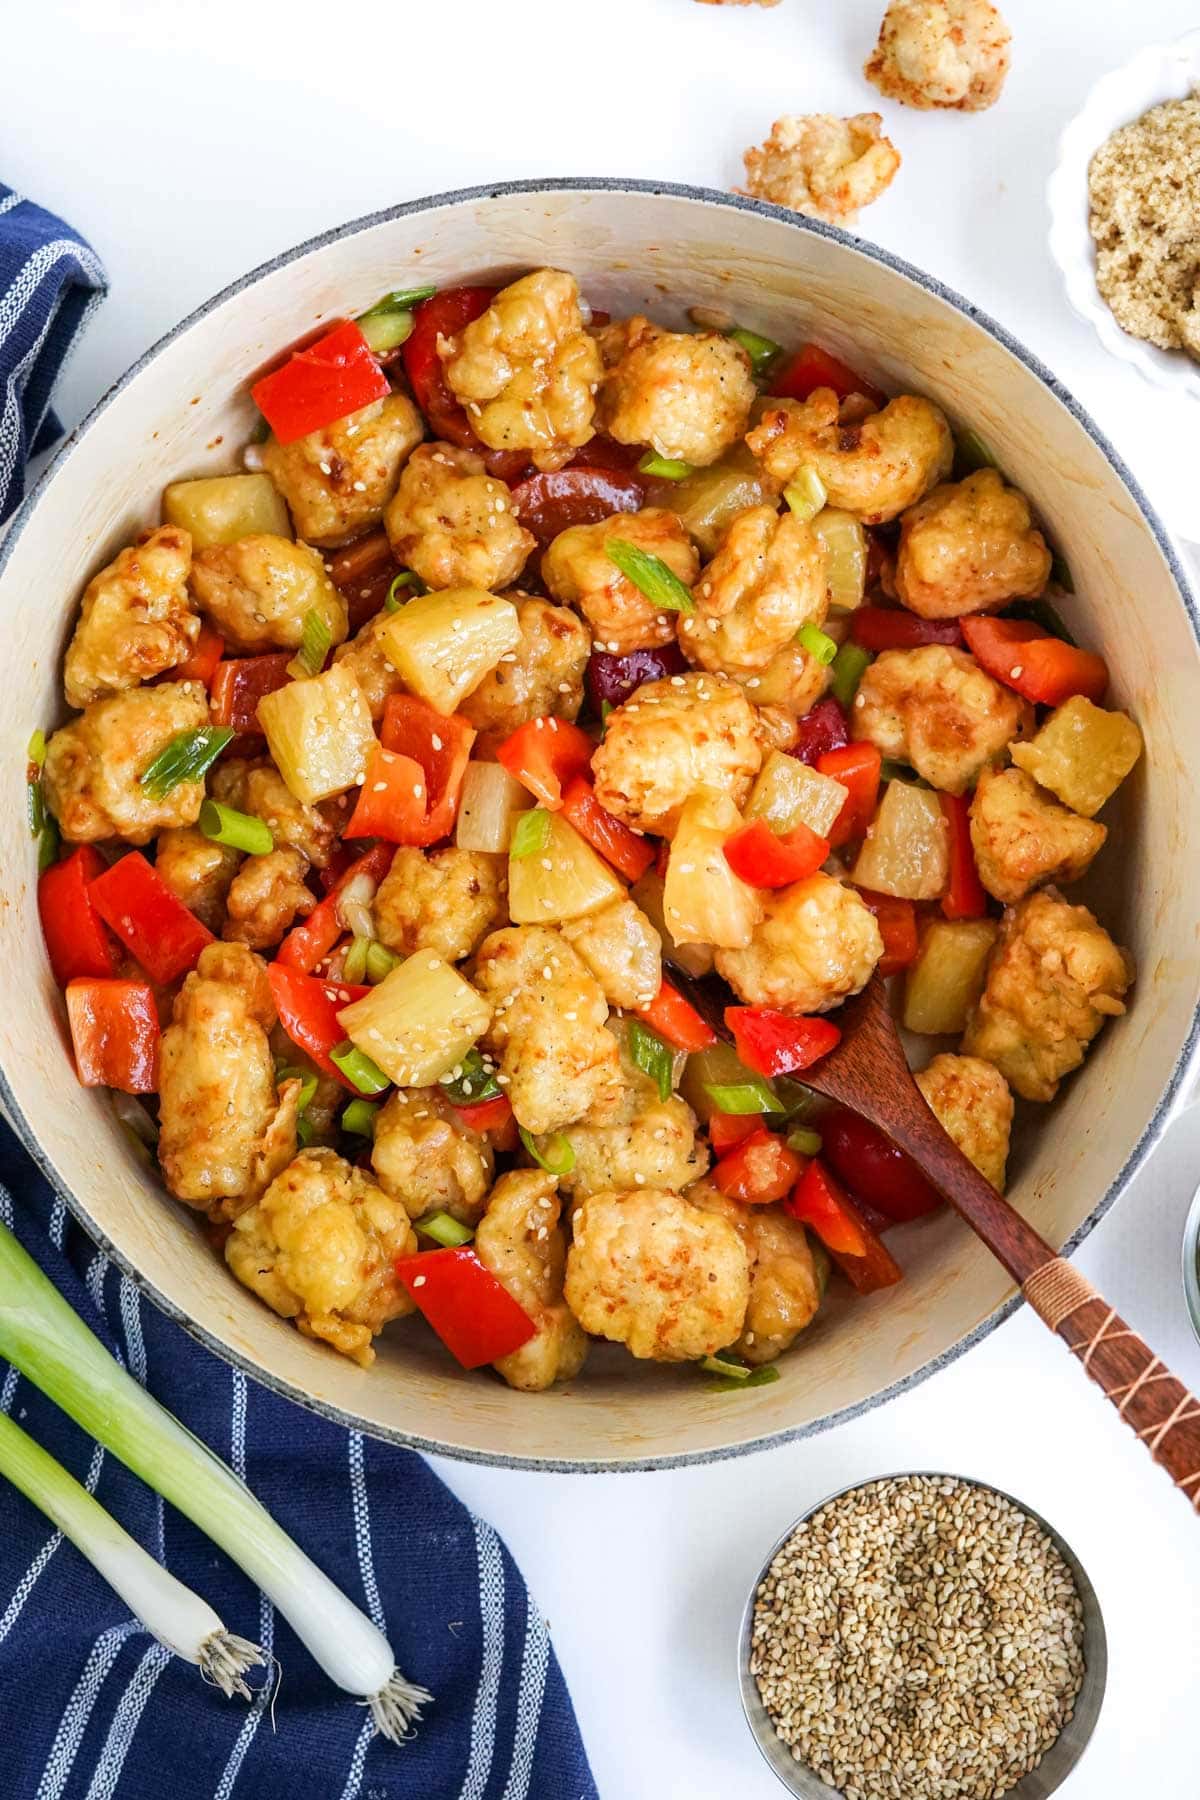 bread chicken pieces and veggies in a pot with sweet and sour sauce